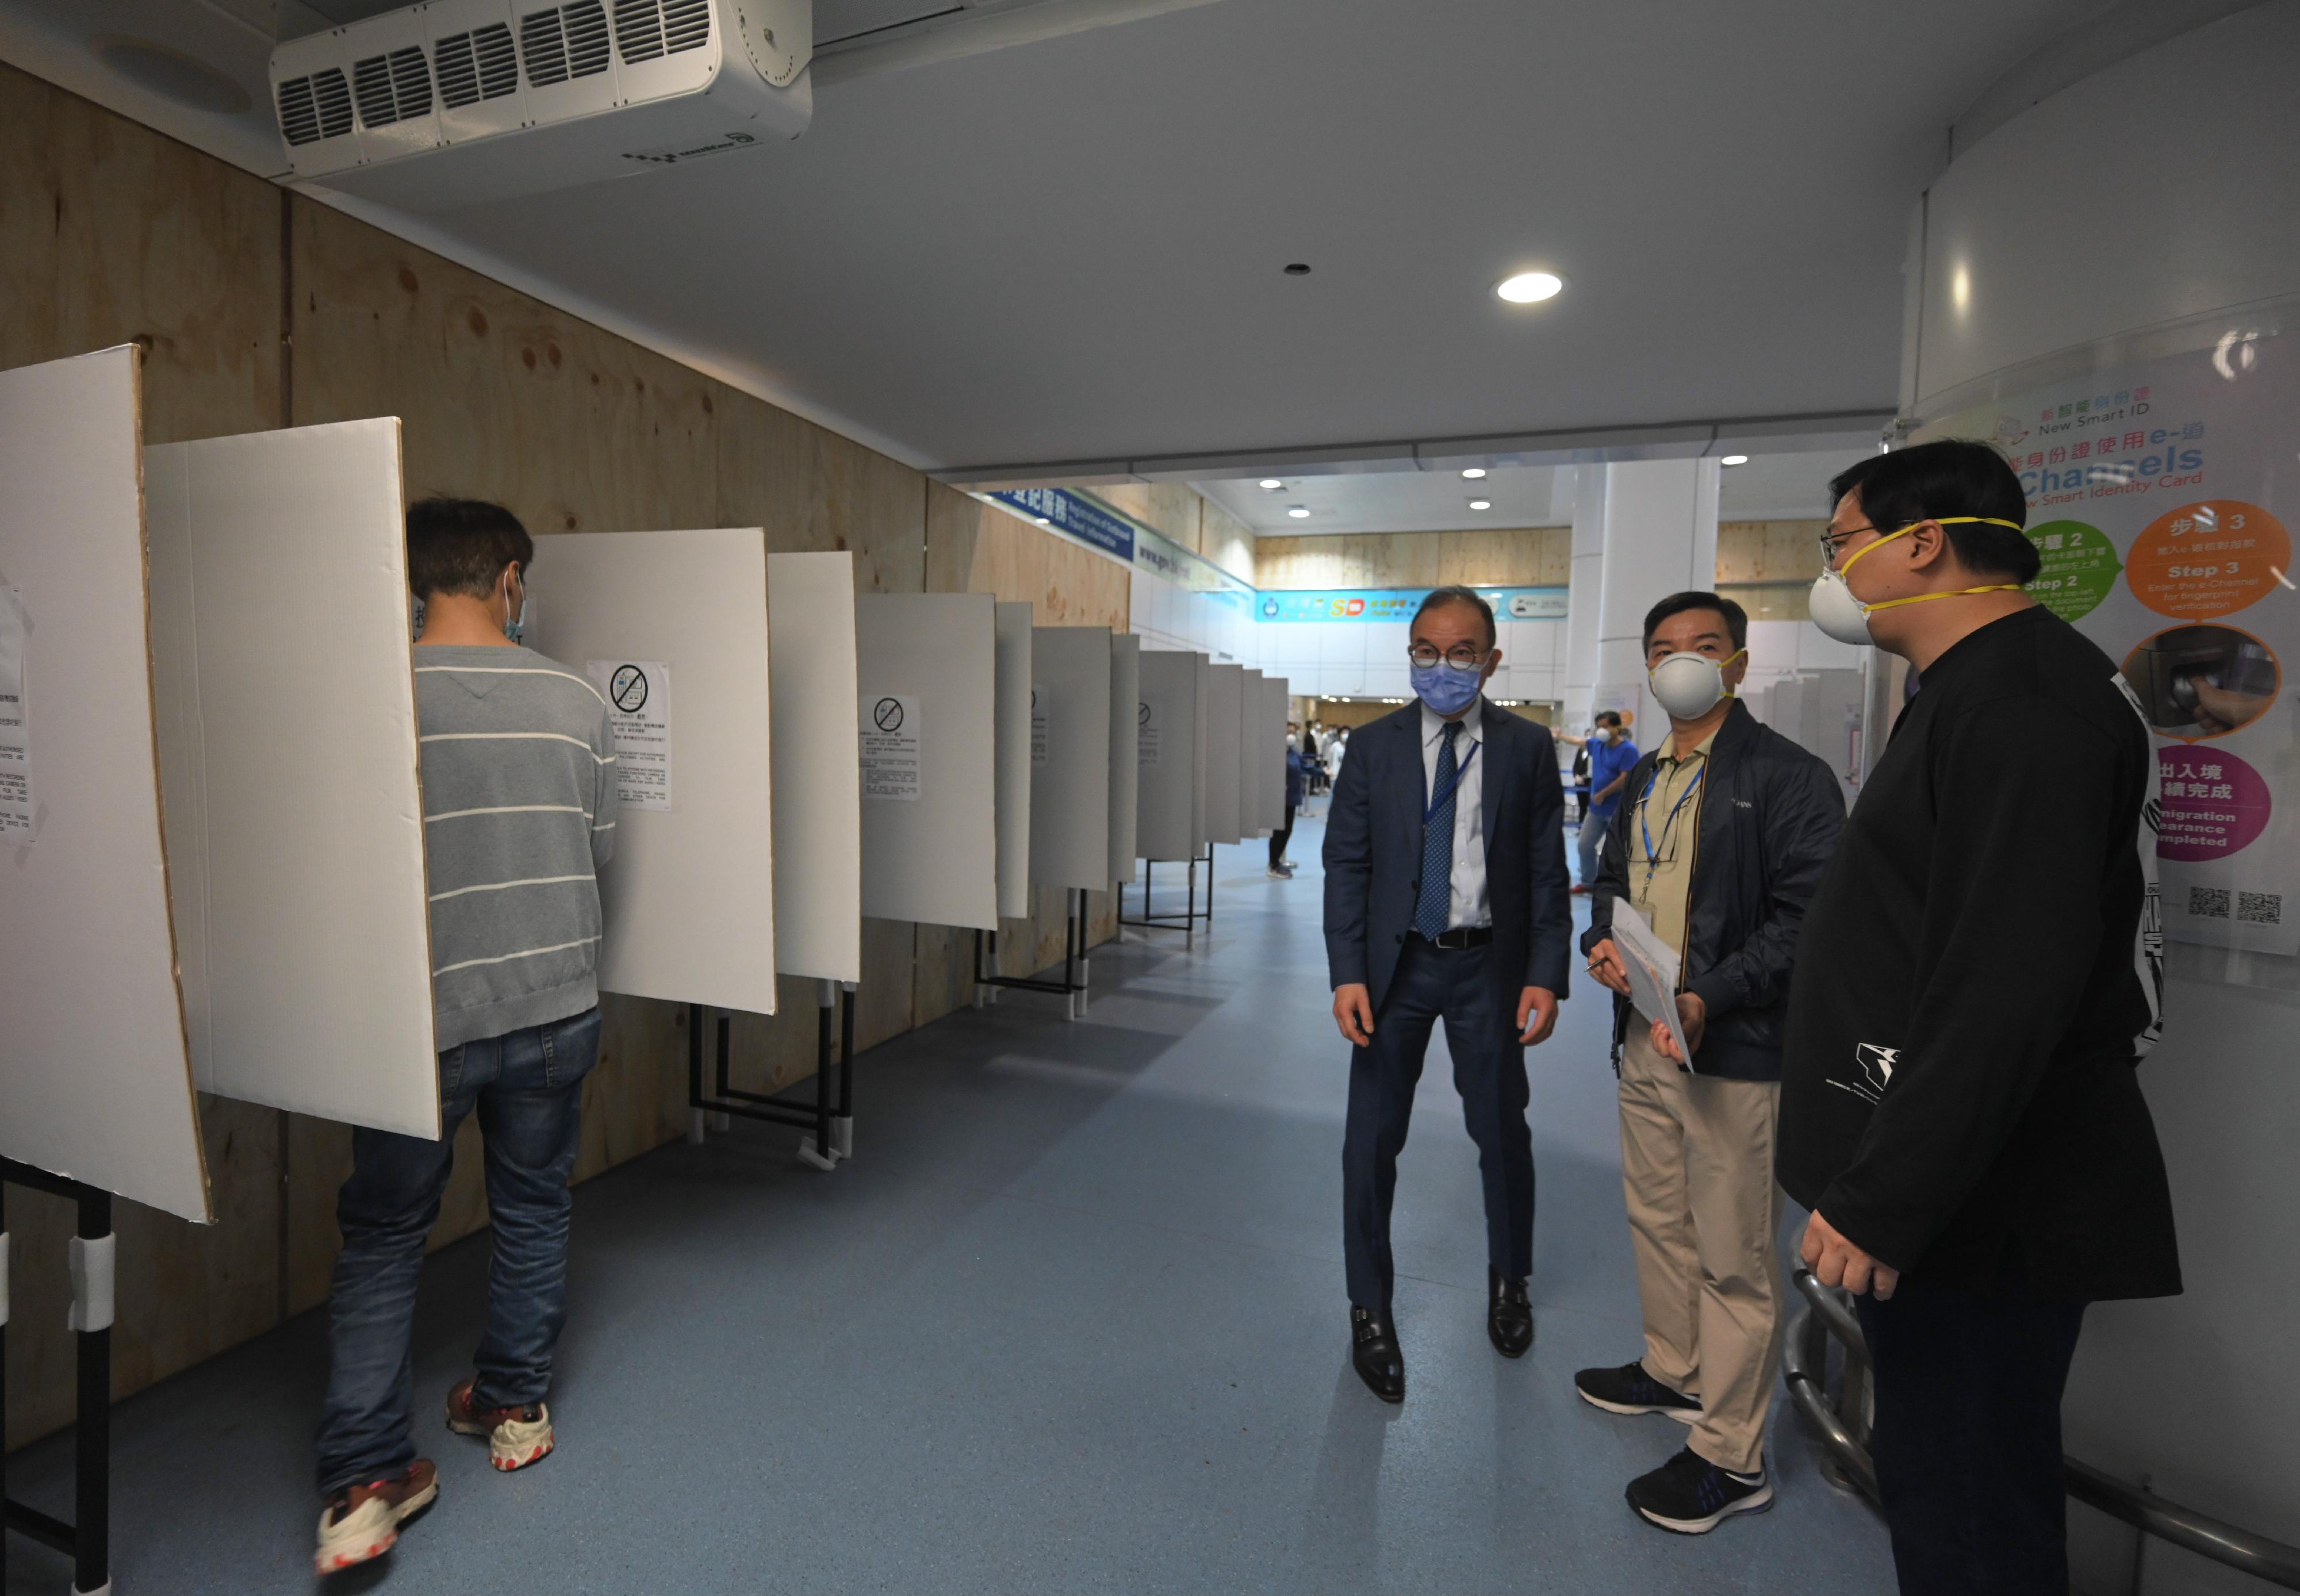 The Secretary for Constitutional and Mainland Affairs, Mr Erick Tsang Kwok-wai, today (December 16) inspected three boundary control point polling stations. Photo shows Mr Tsang (third right) observing the design of the voting compartments at the polling station located at Lo Wu boundary control point.